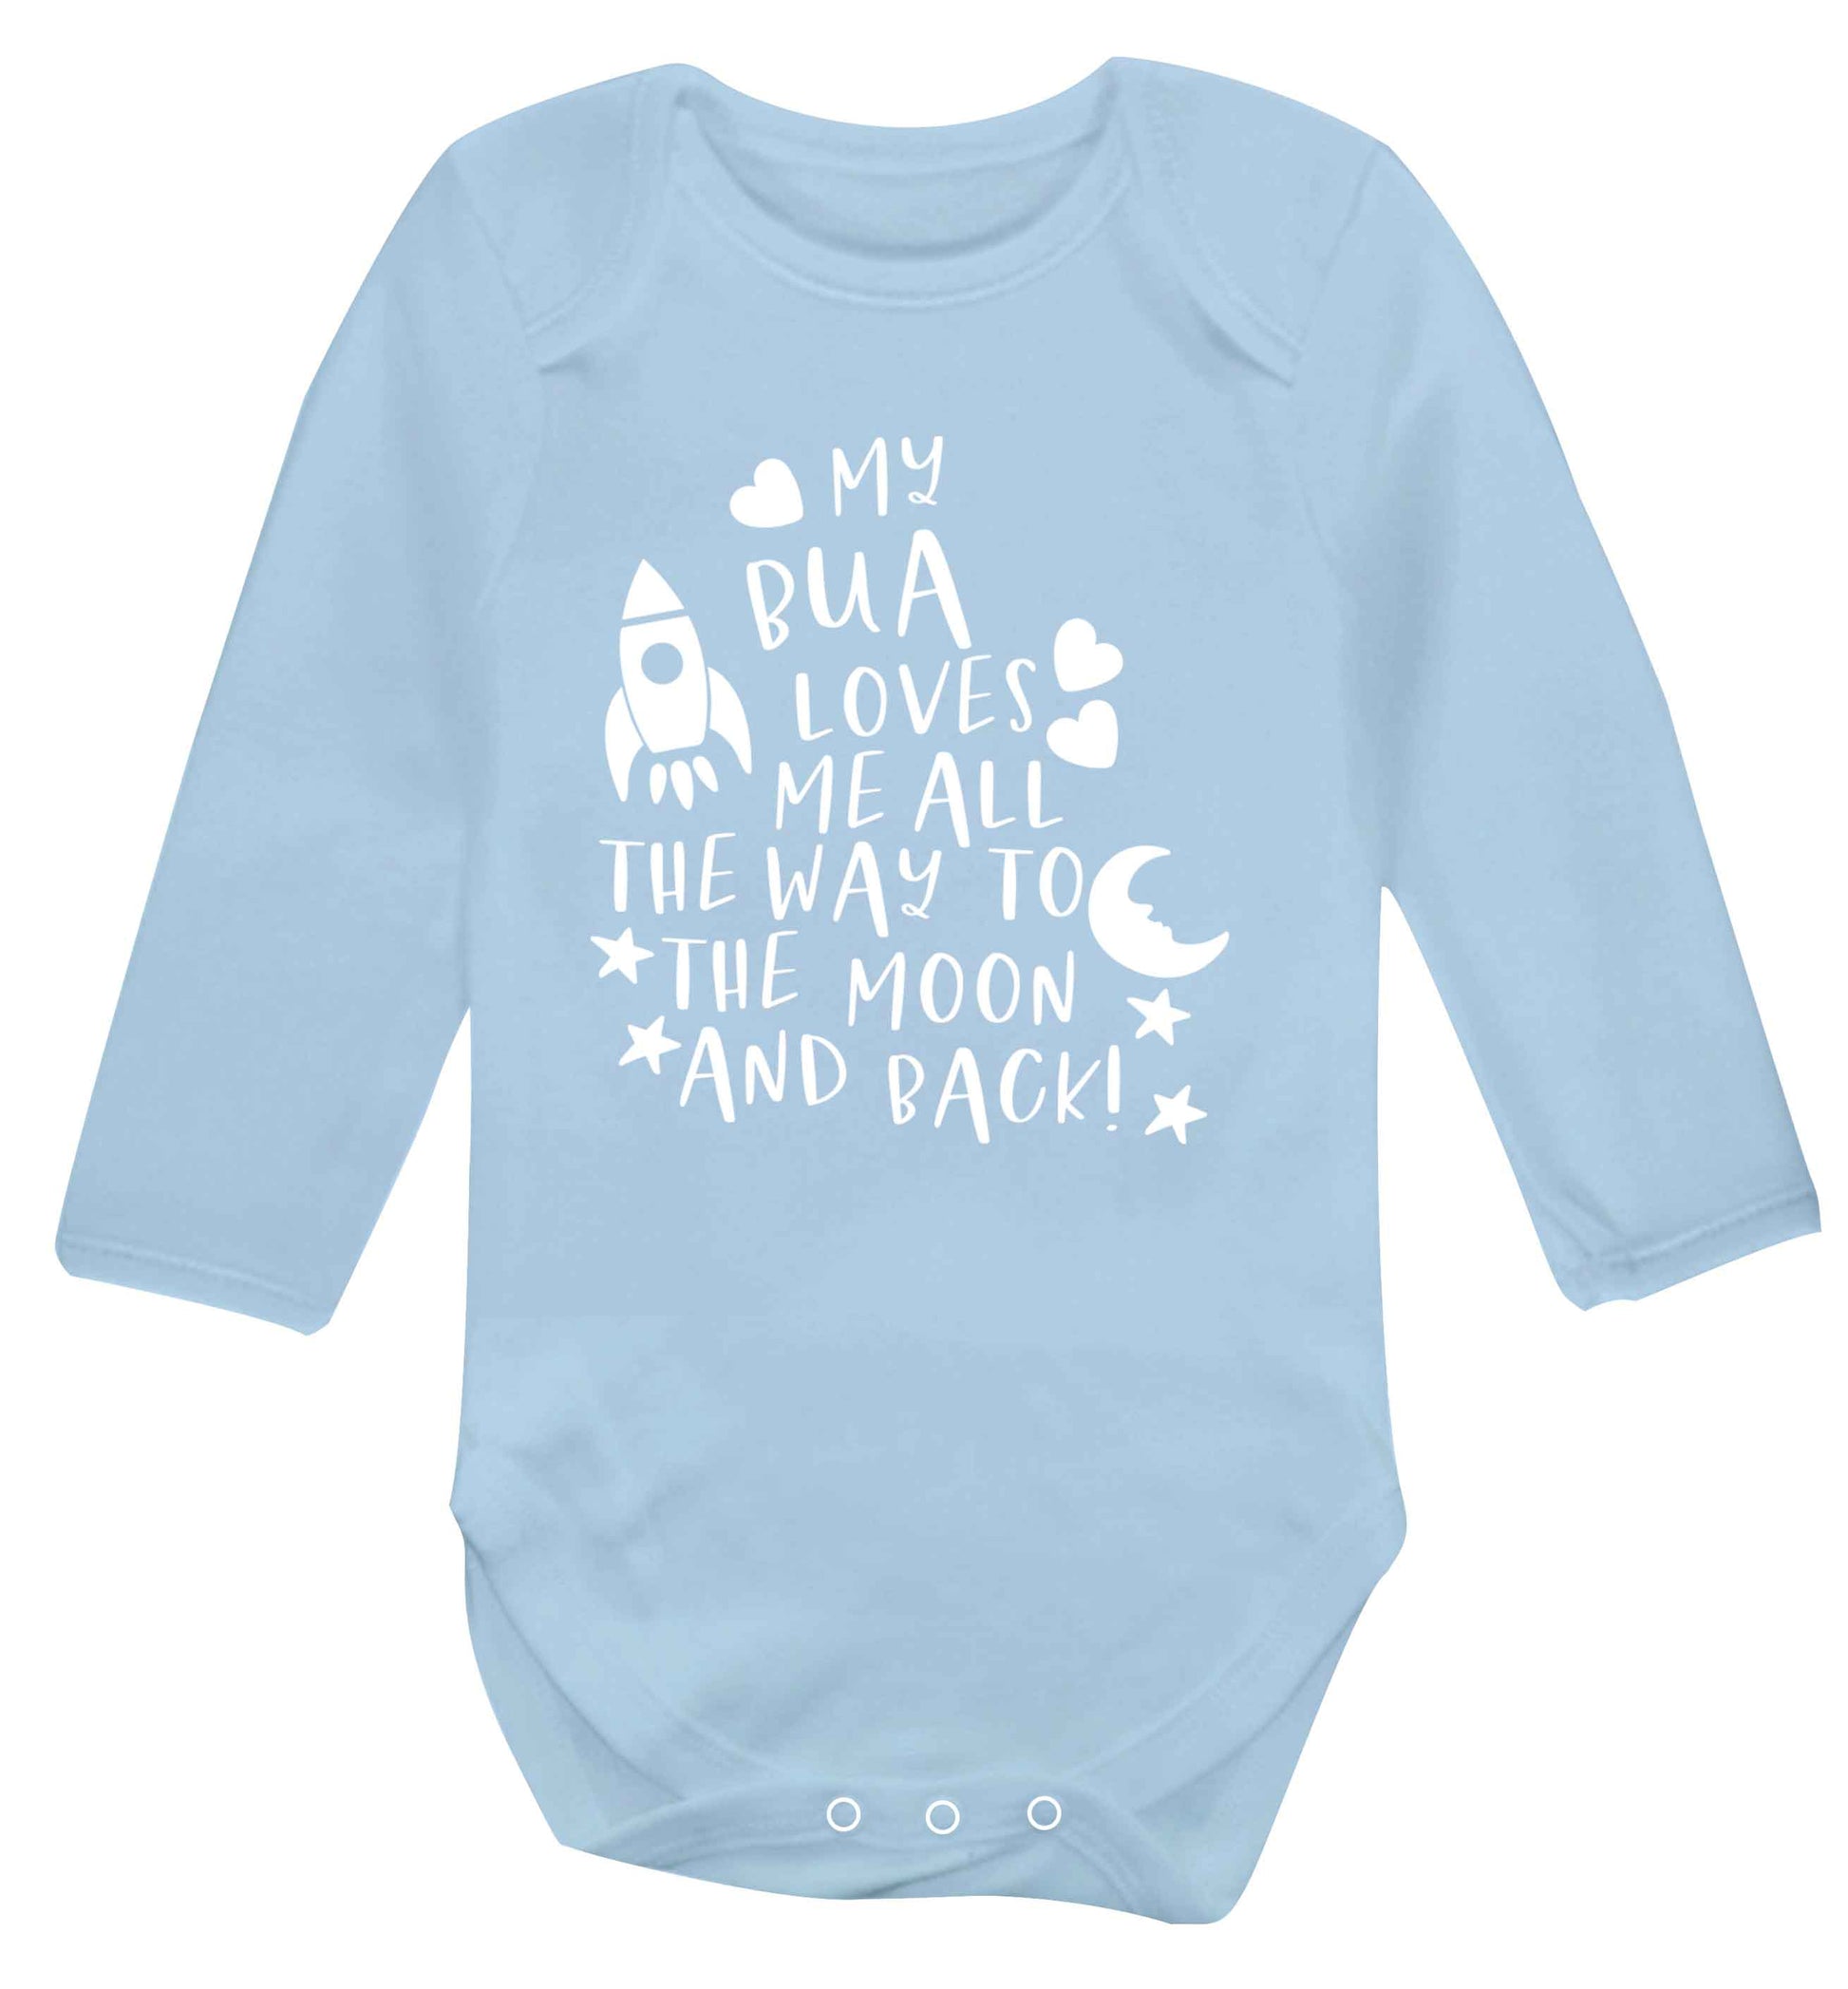 My bua loves me all they way to the moon and back Baby Vest long sleeved pale blue 6-12 months